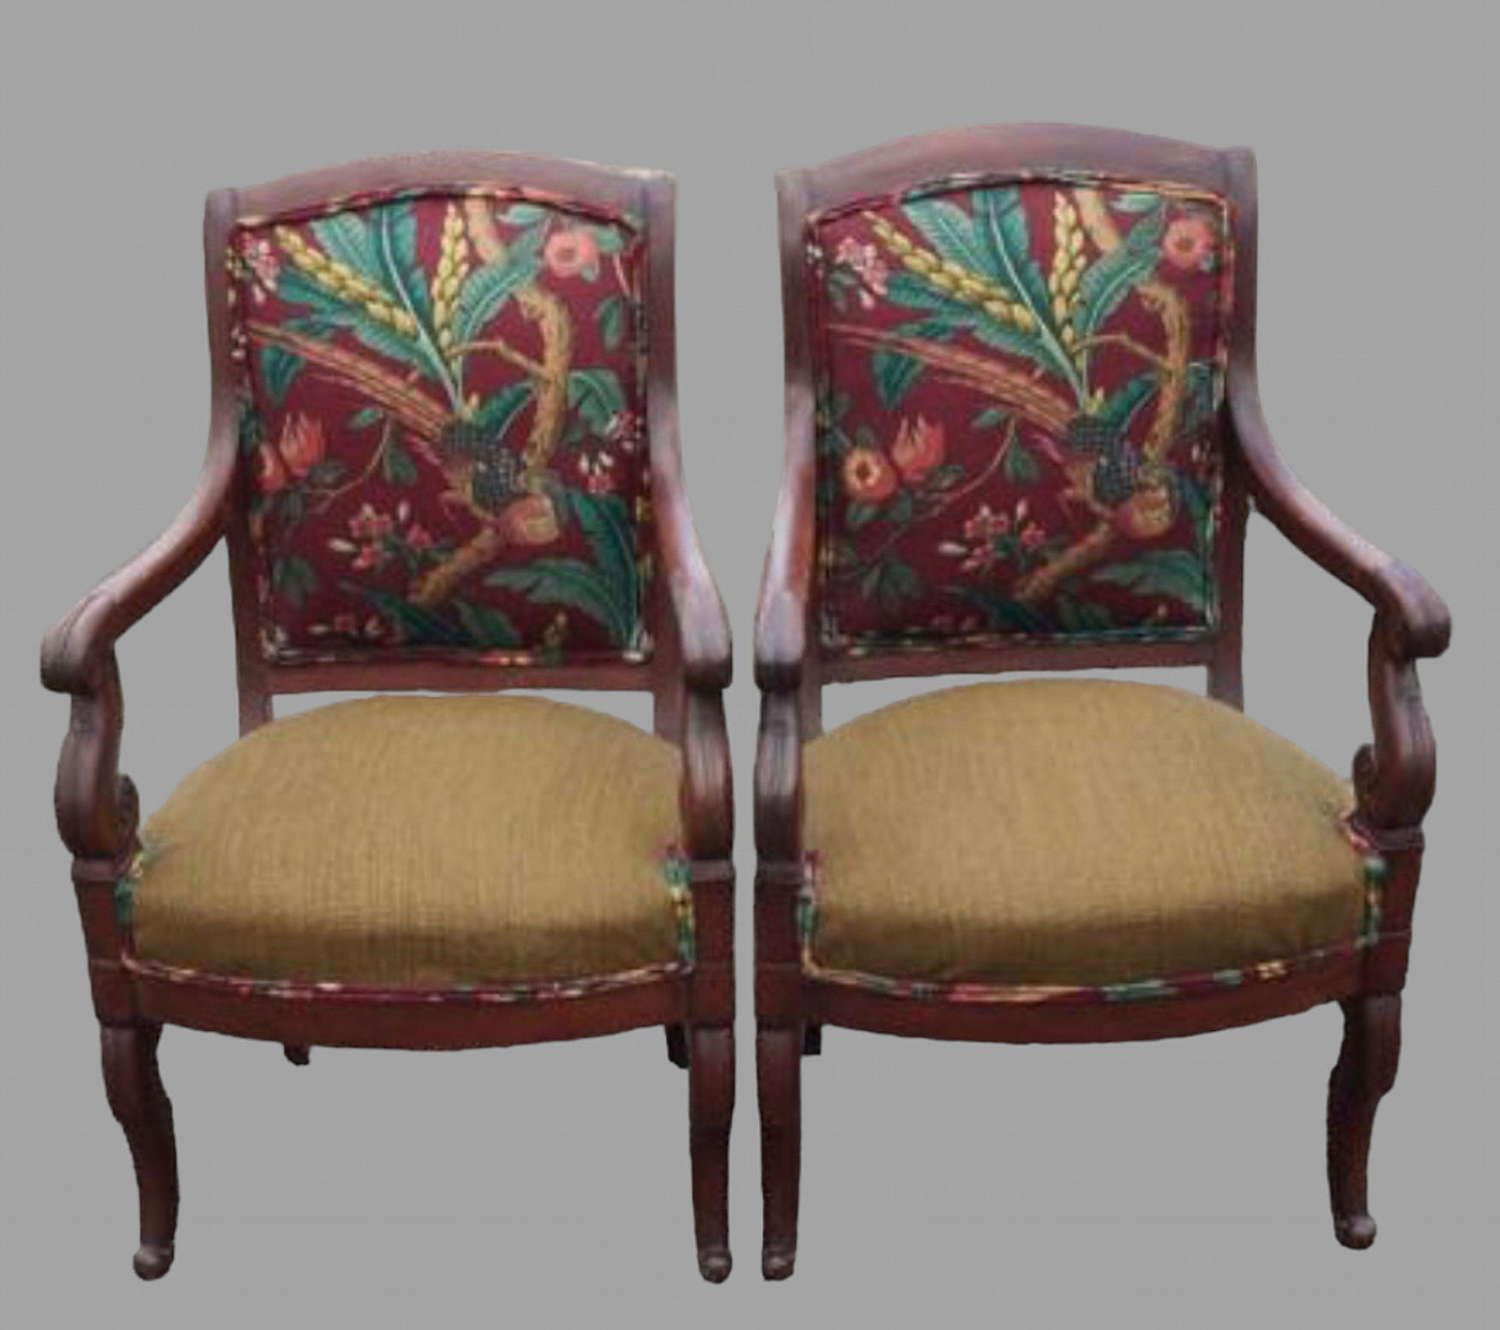 A Pair of Early 19thc Mahogany Chairs